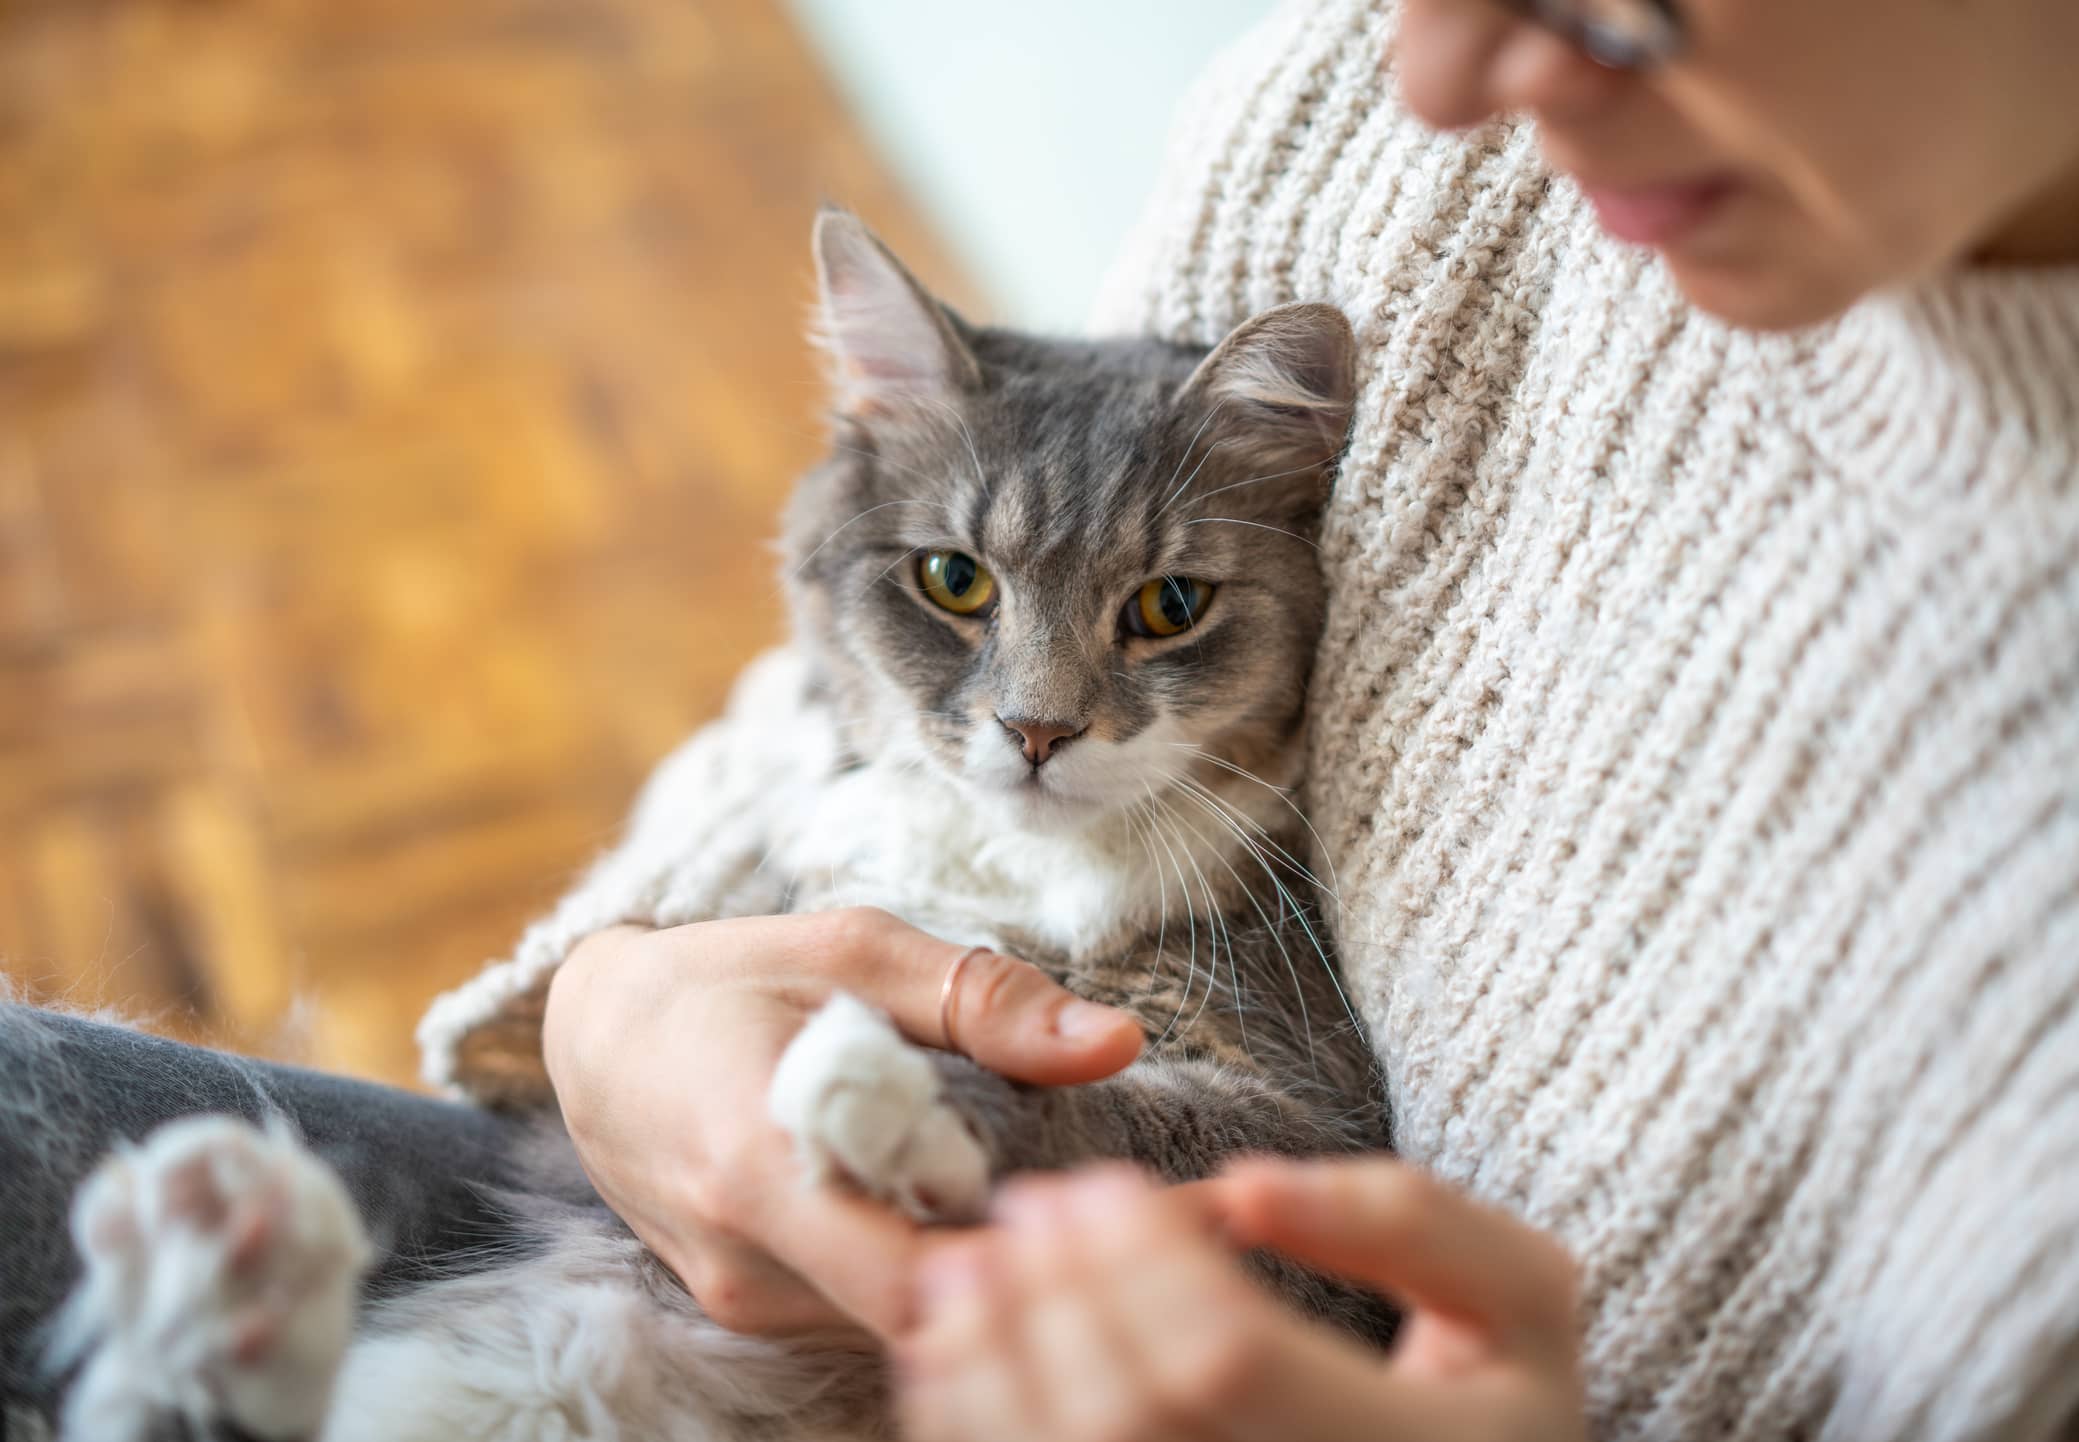 woman holding a grey and white cat in her lap, holding the cat's front paws